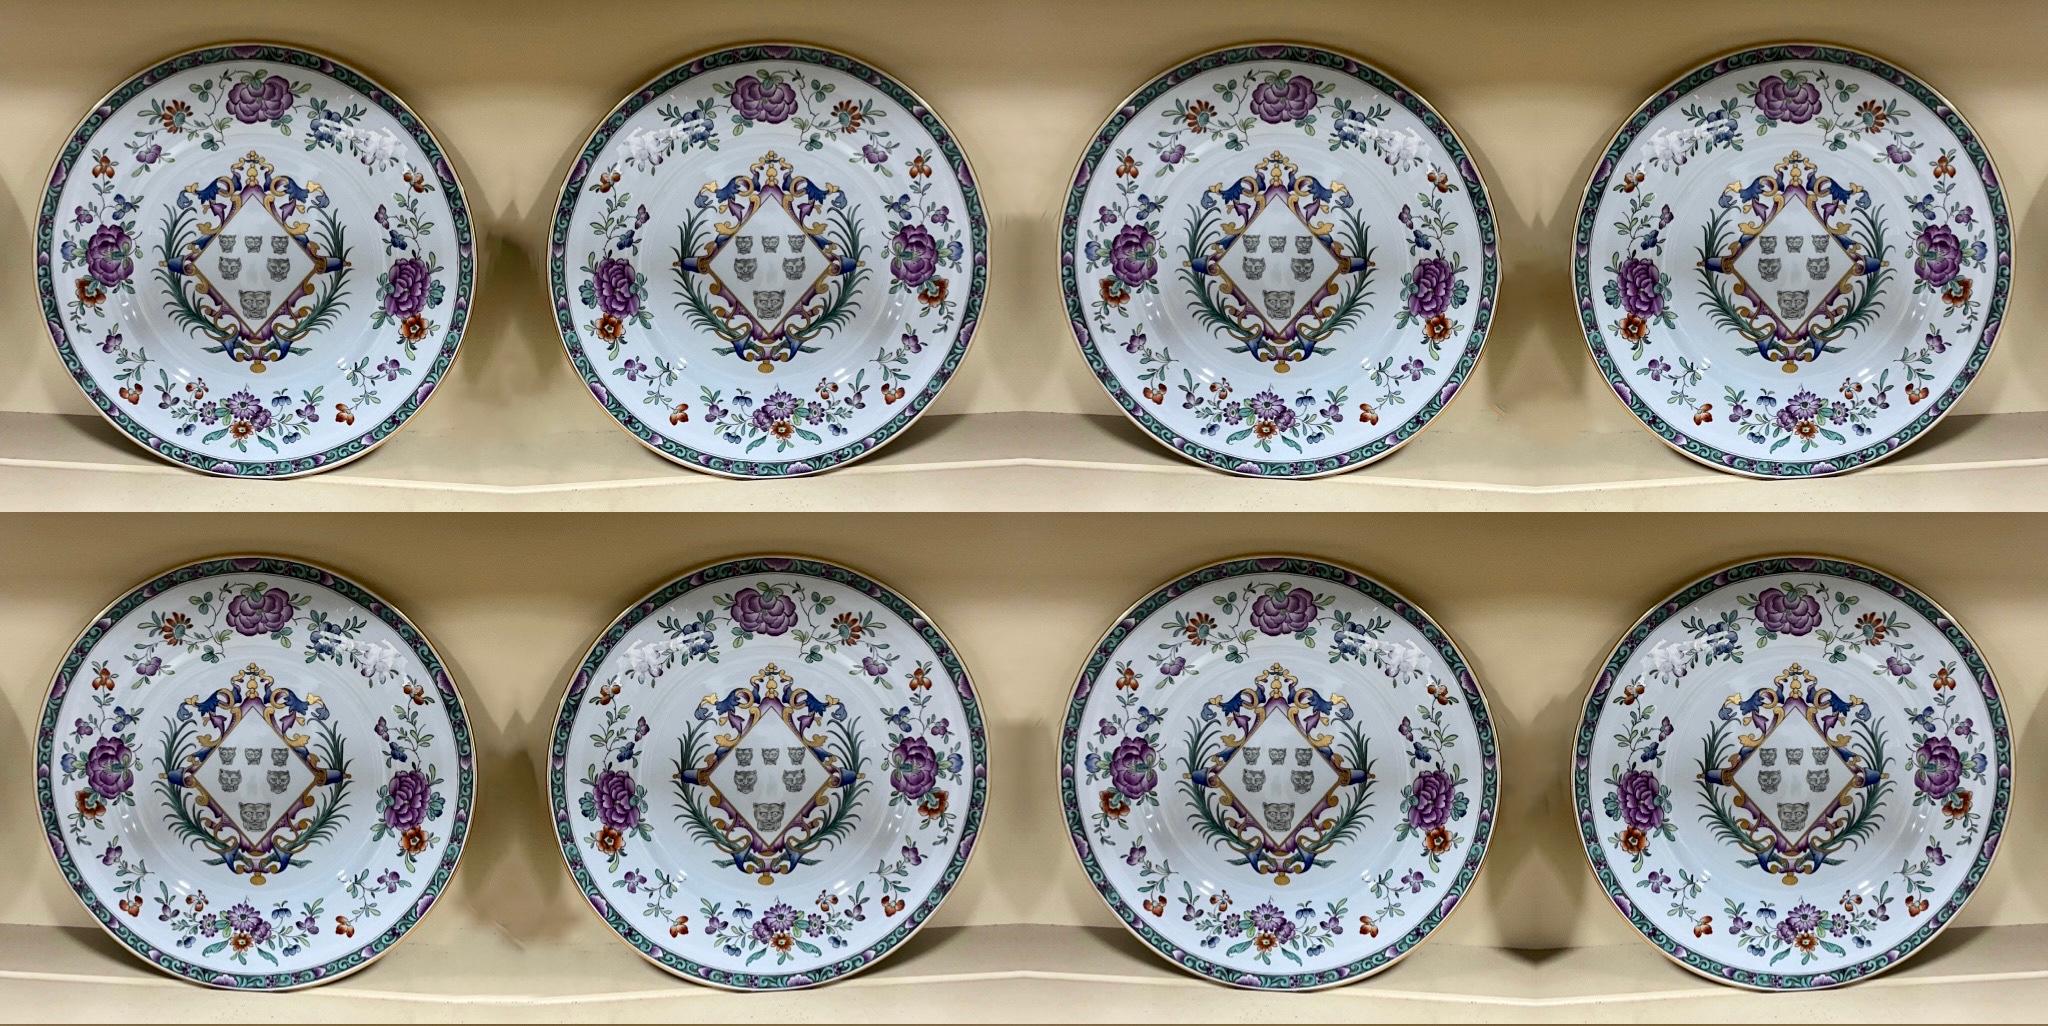 20th-C. English Copeland Spode for Tiffany & Co. Armorial Plates, S/8 In Good Condition For Sale In Kennesaw, GA